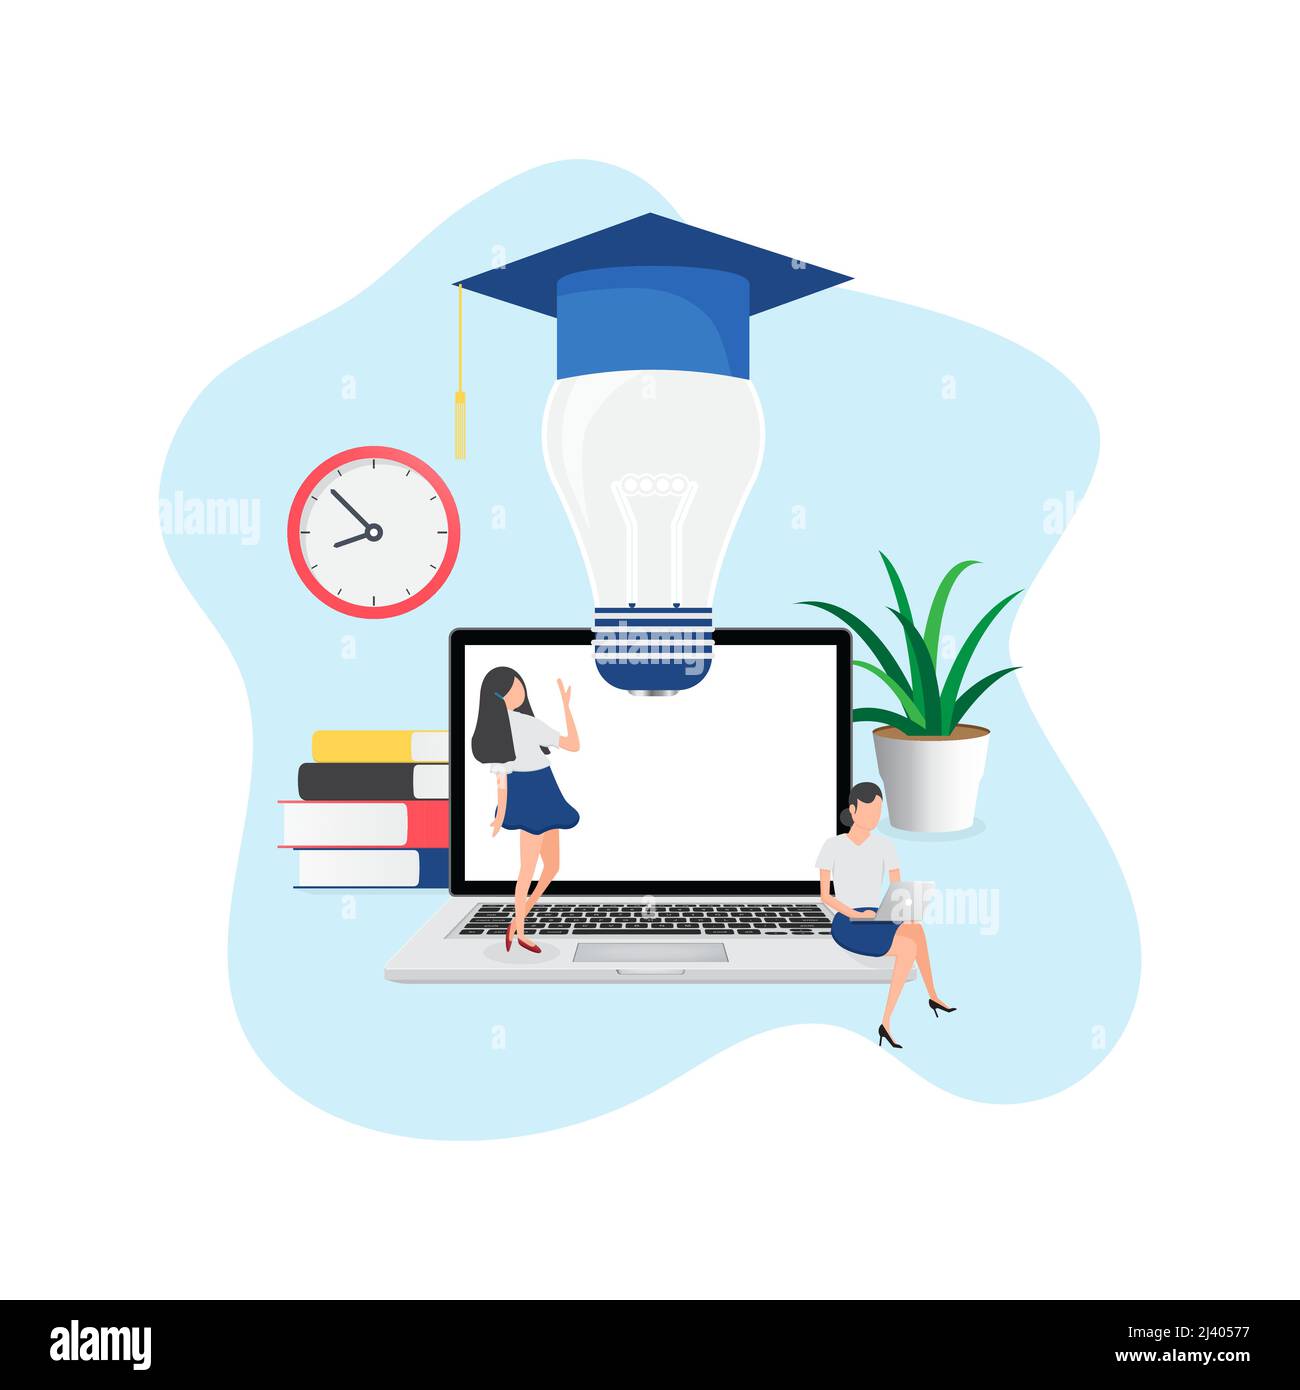 Flat design concept of online education, training and courses, learning, video tutorials. Vector illustration for website banner, marketing material, Stock Vector